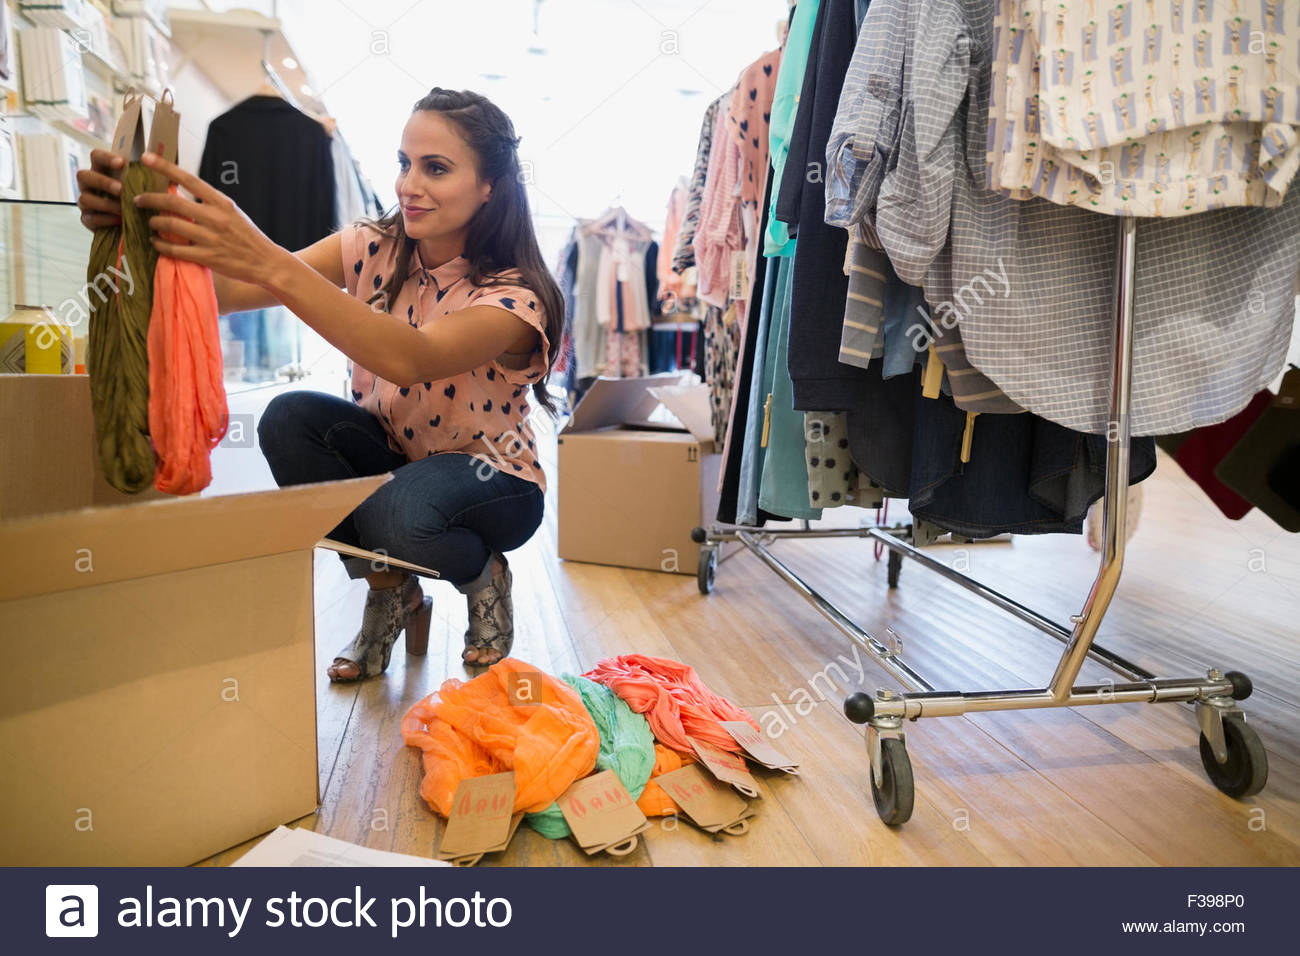 Business owner unpacking new inventory in clothing shop Stock Photo